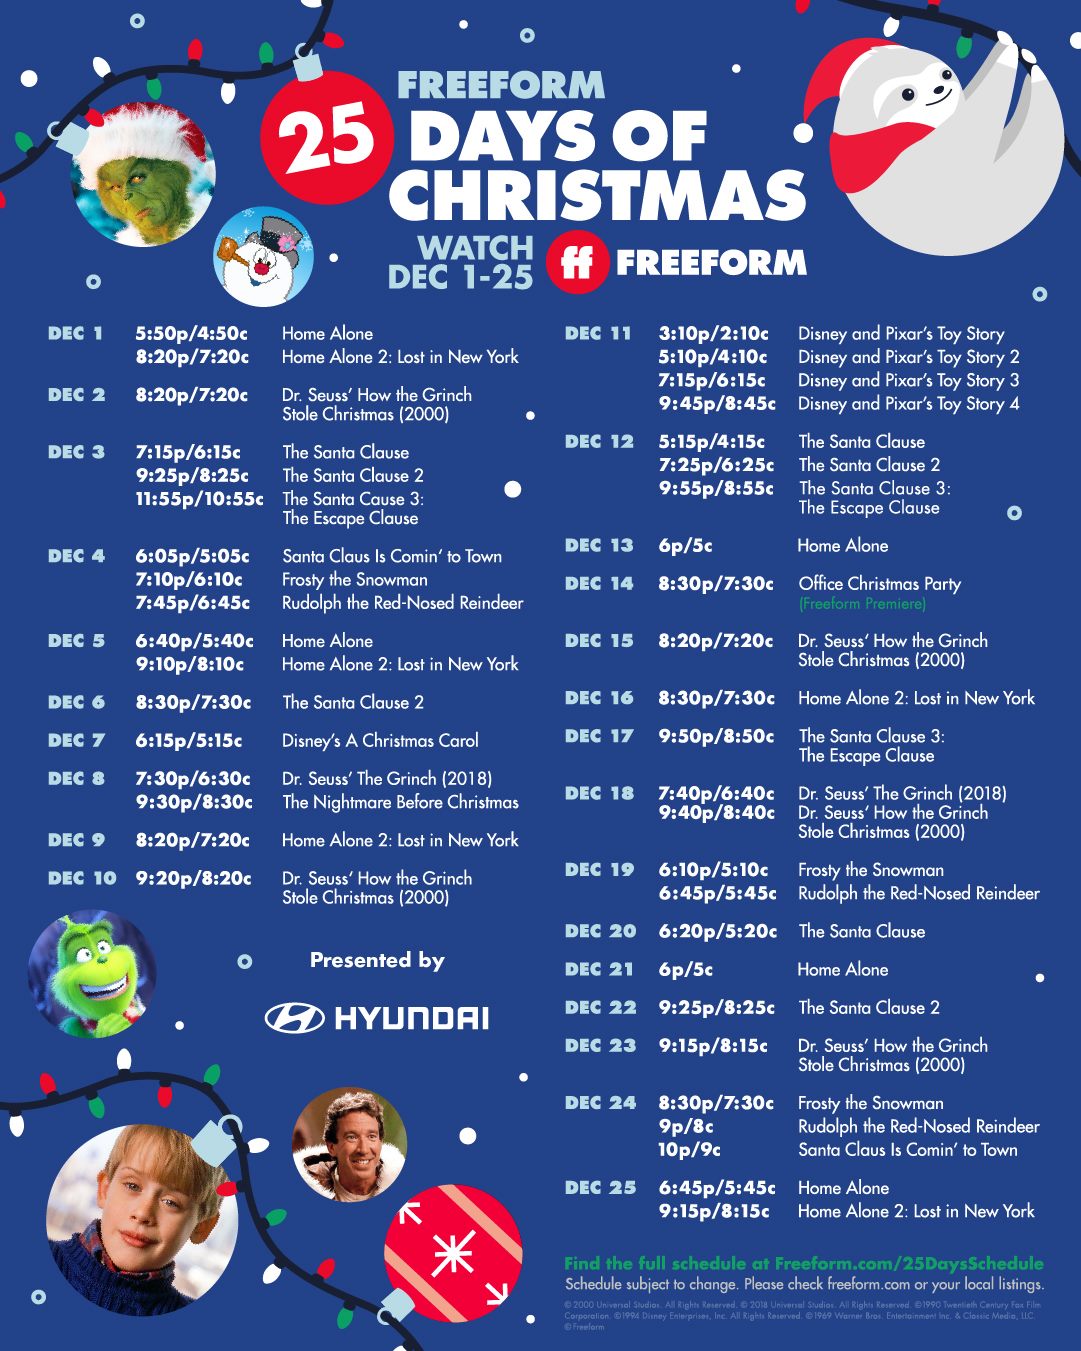 Freeform’s 25 Days of Christmas 2021 Schedule